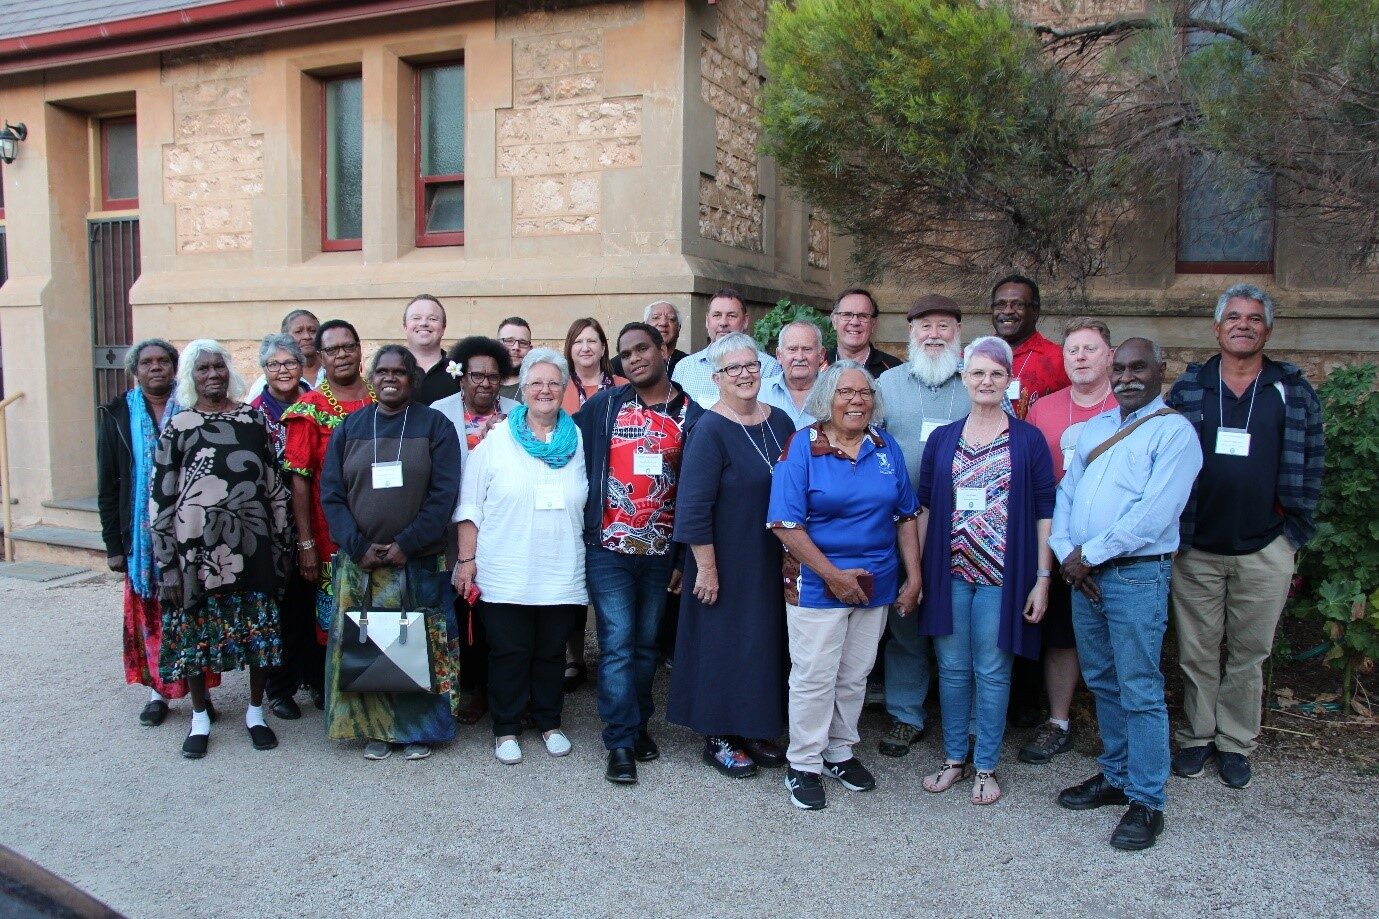 Members of the National Aboriginal and Torres Strait Islander Anglican Council (NATSIAC) at the 2019 Gathering in Adelaide. © ABM, 2019